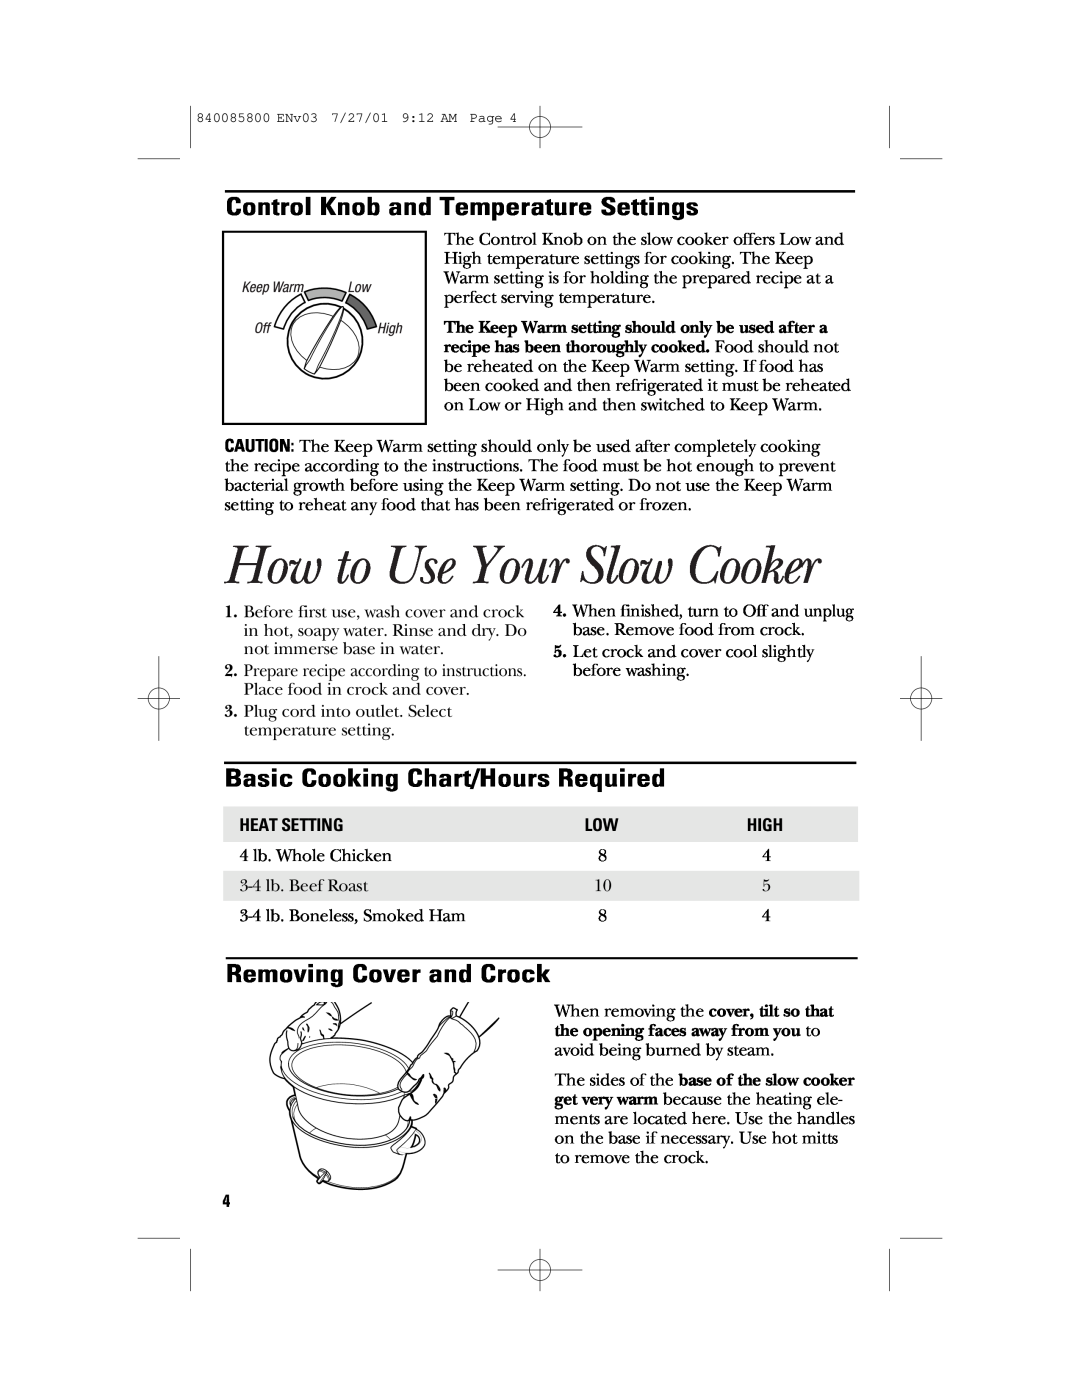 GE 106851 How to Use Your Slow Cooker, Control Knob and Temperature Settings, Basic Cooking Chart/Hours Required, High 